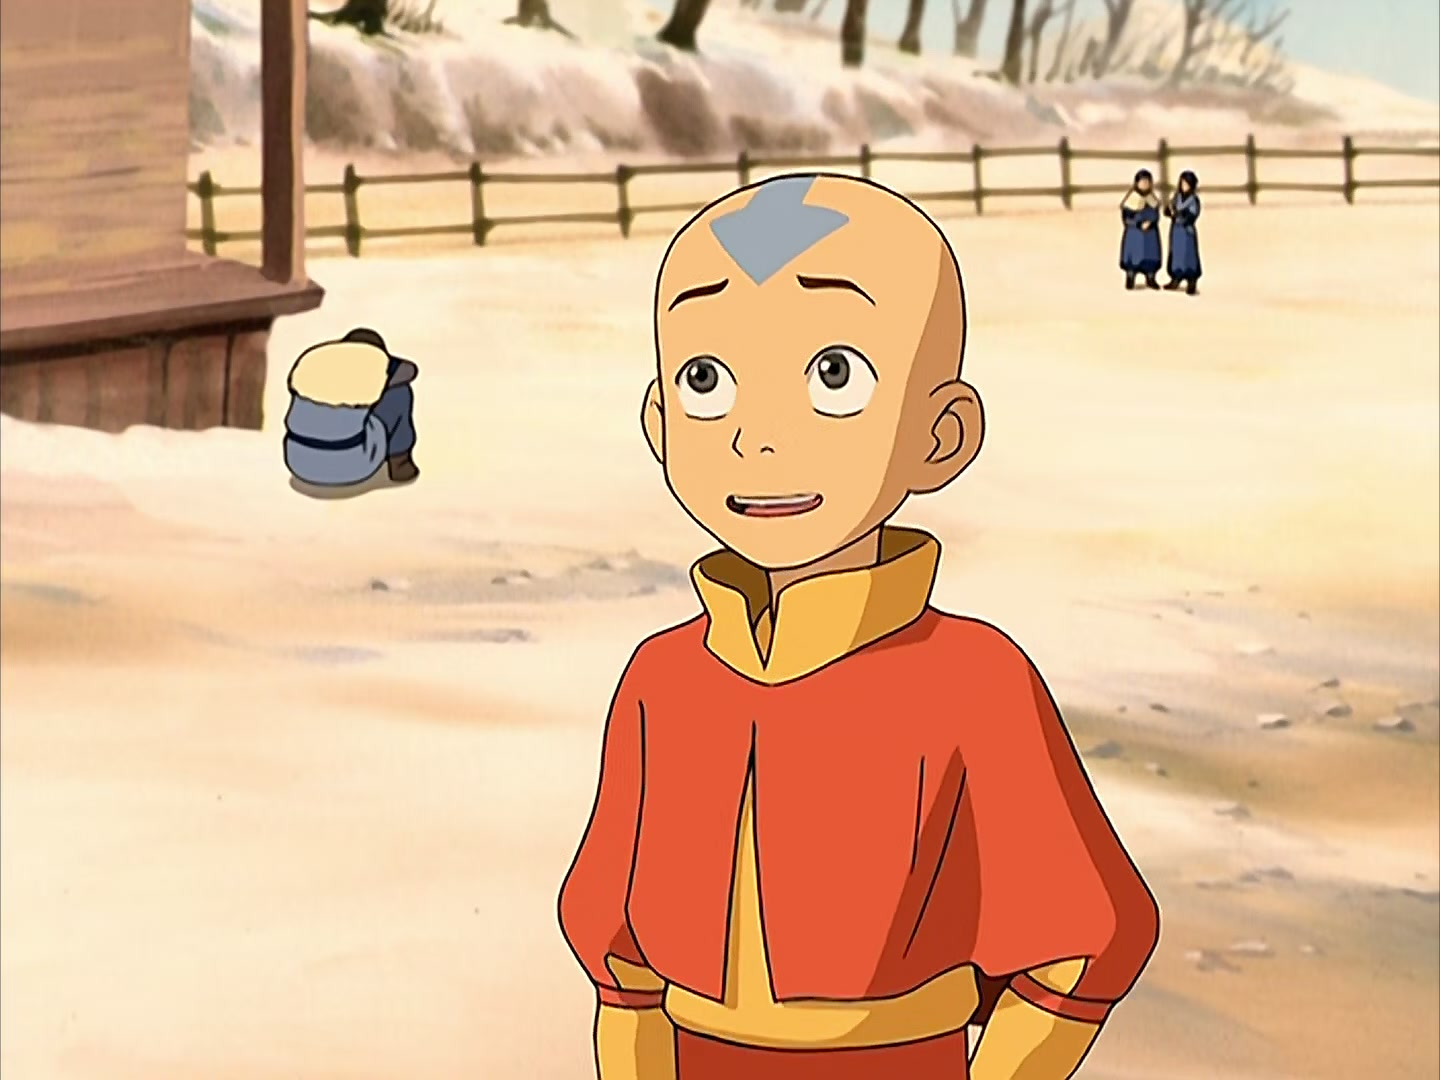 Avatar legend of aang english. Аватар аанг.